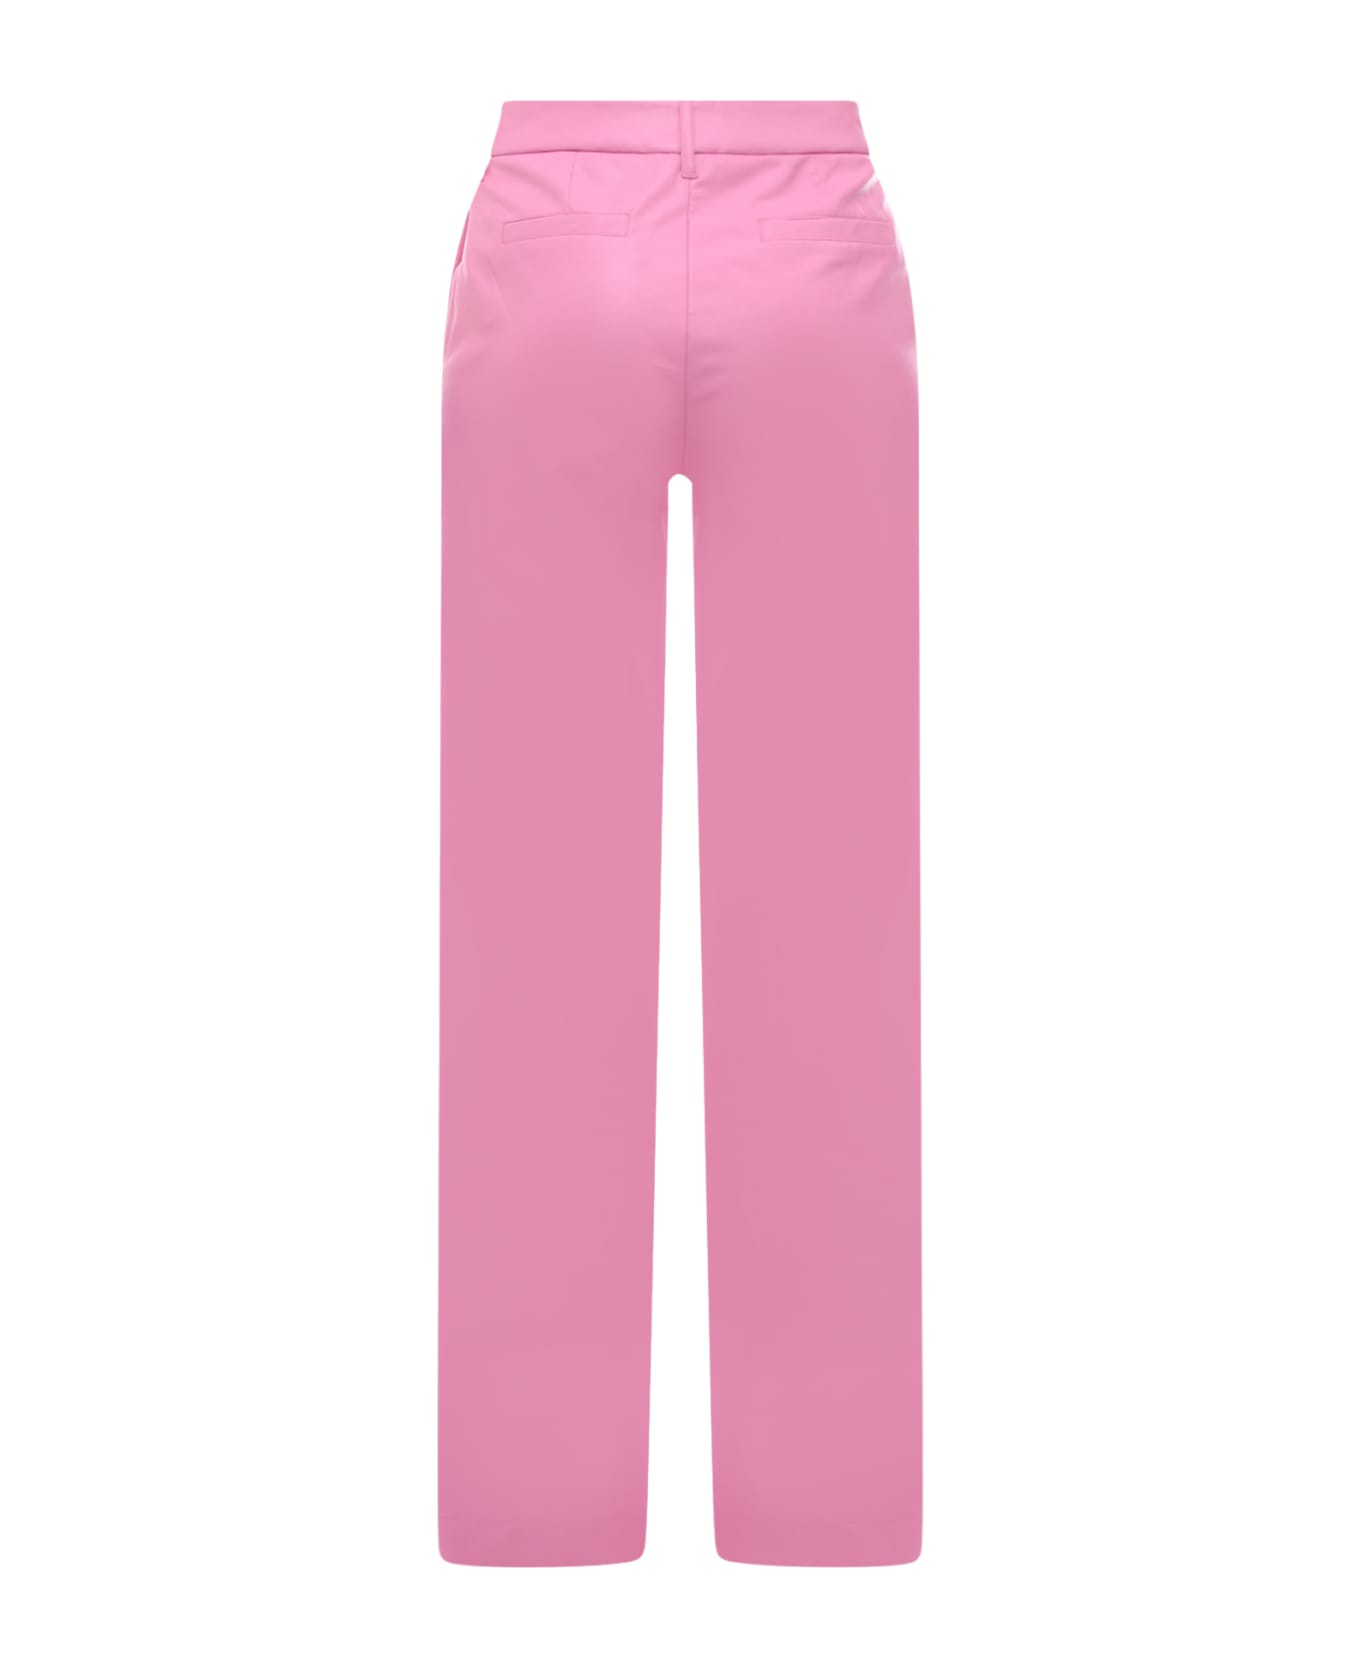 STAND STUDIO Mabel Trouser - Pink ボトムス